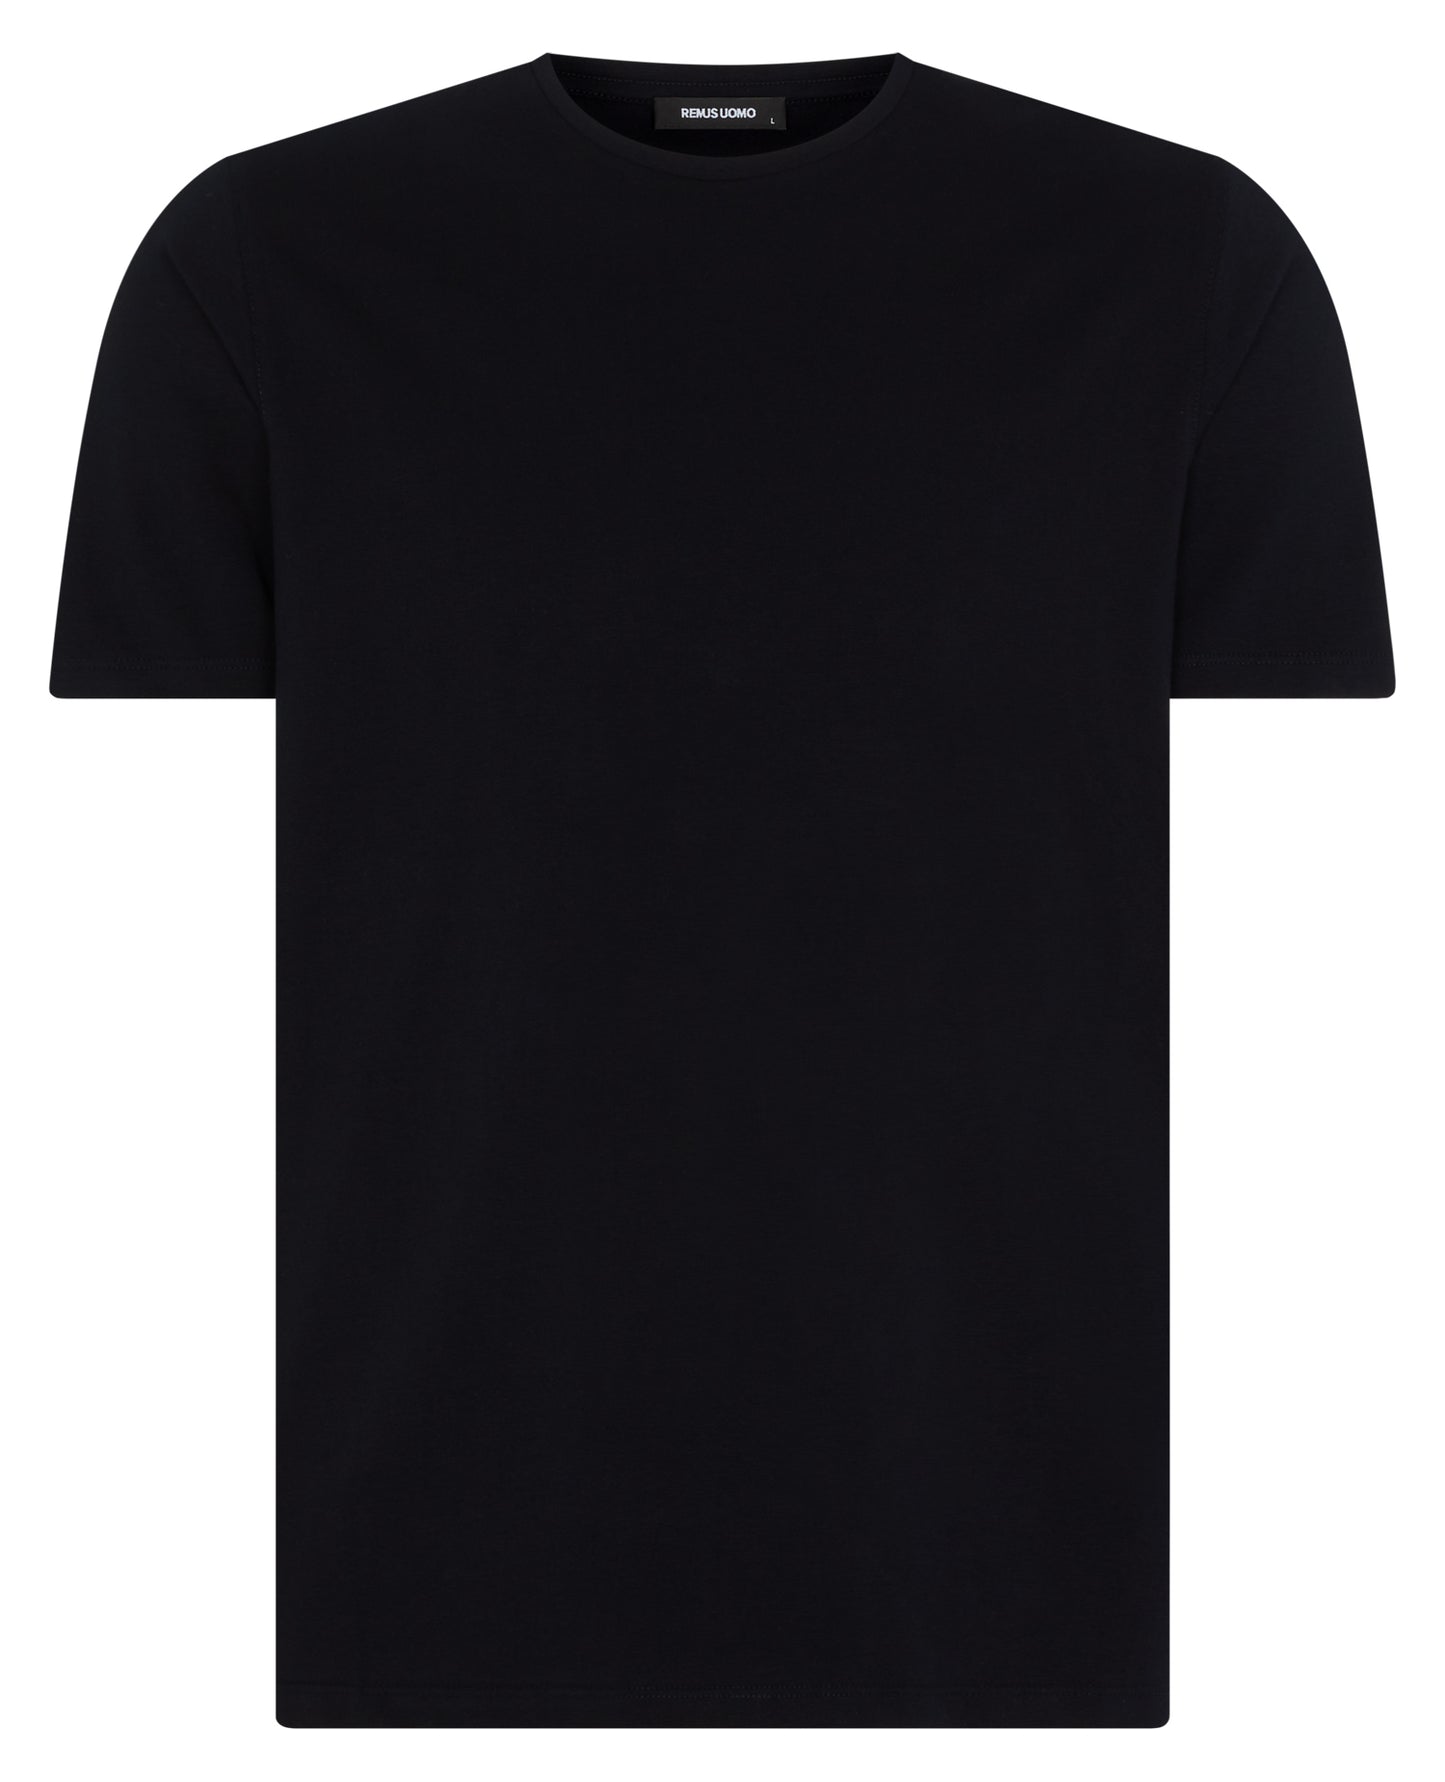 Remus Uomo Tapered Fit Navy Cotton T-Shirt